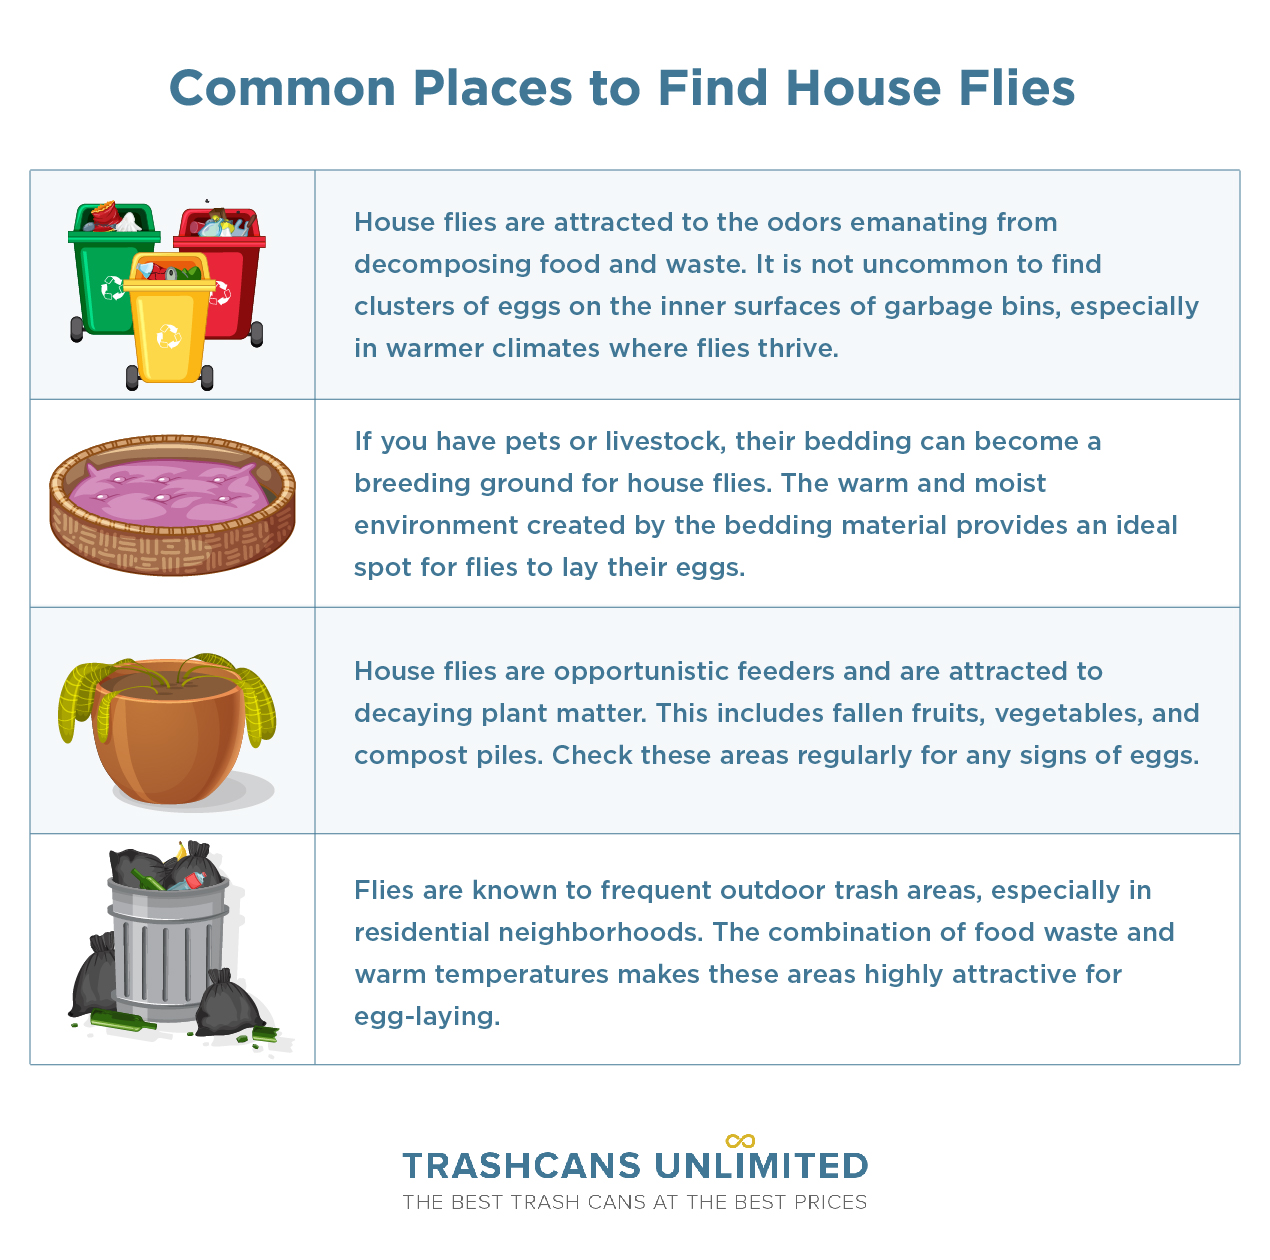 Common Places to Find House Flies